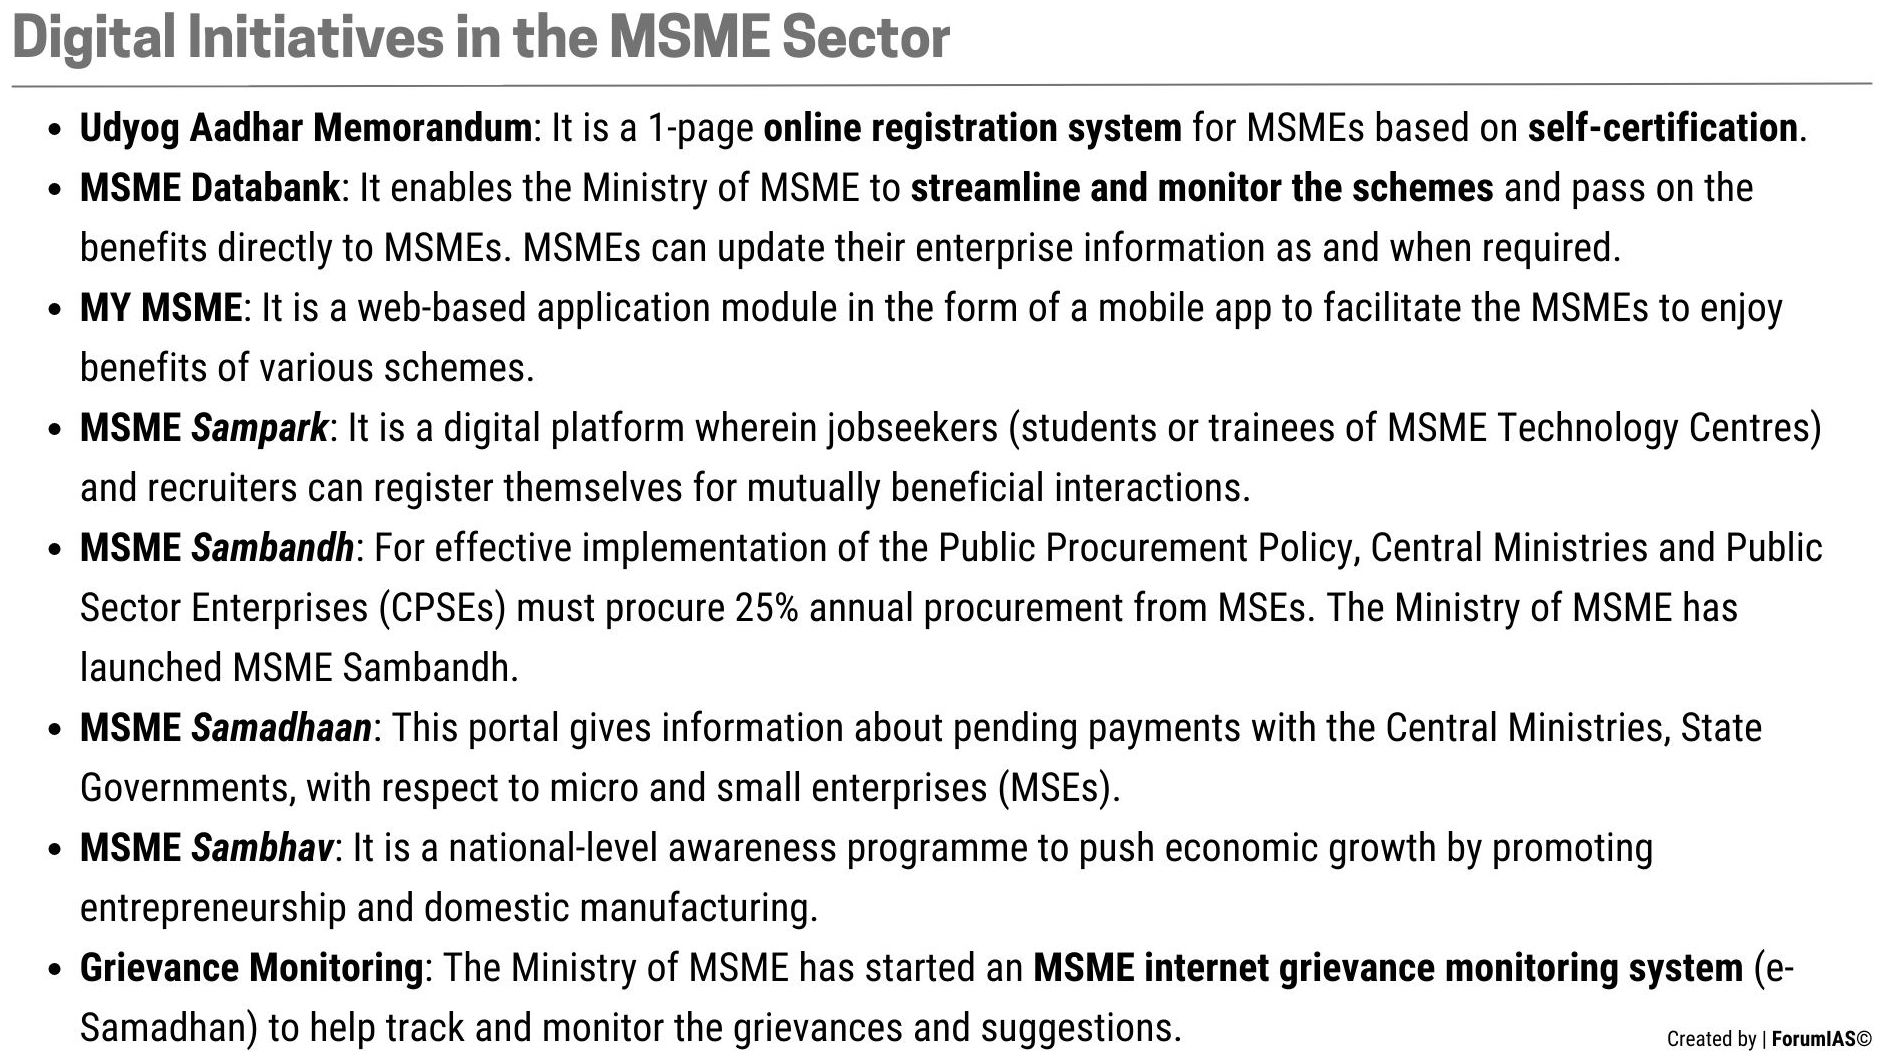 Digital Initiatives in the MSME Sector UPSC